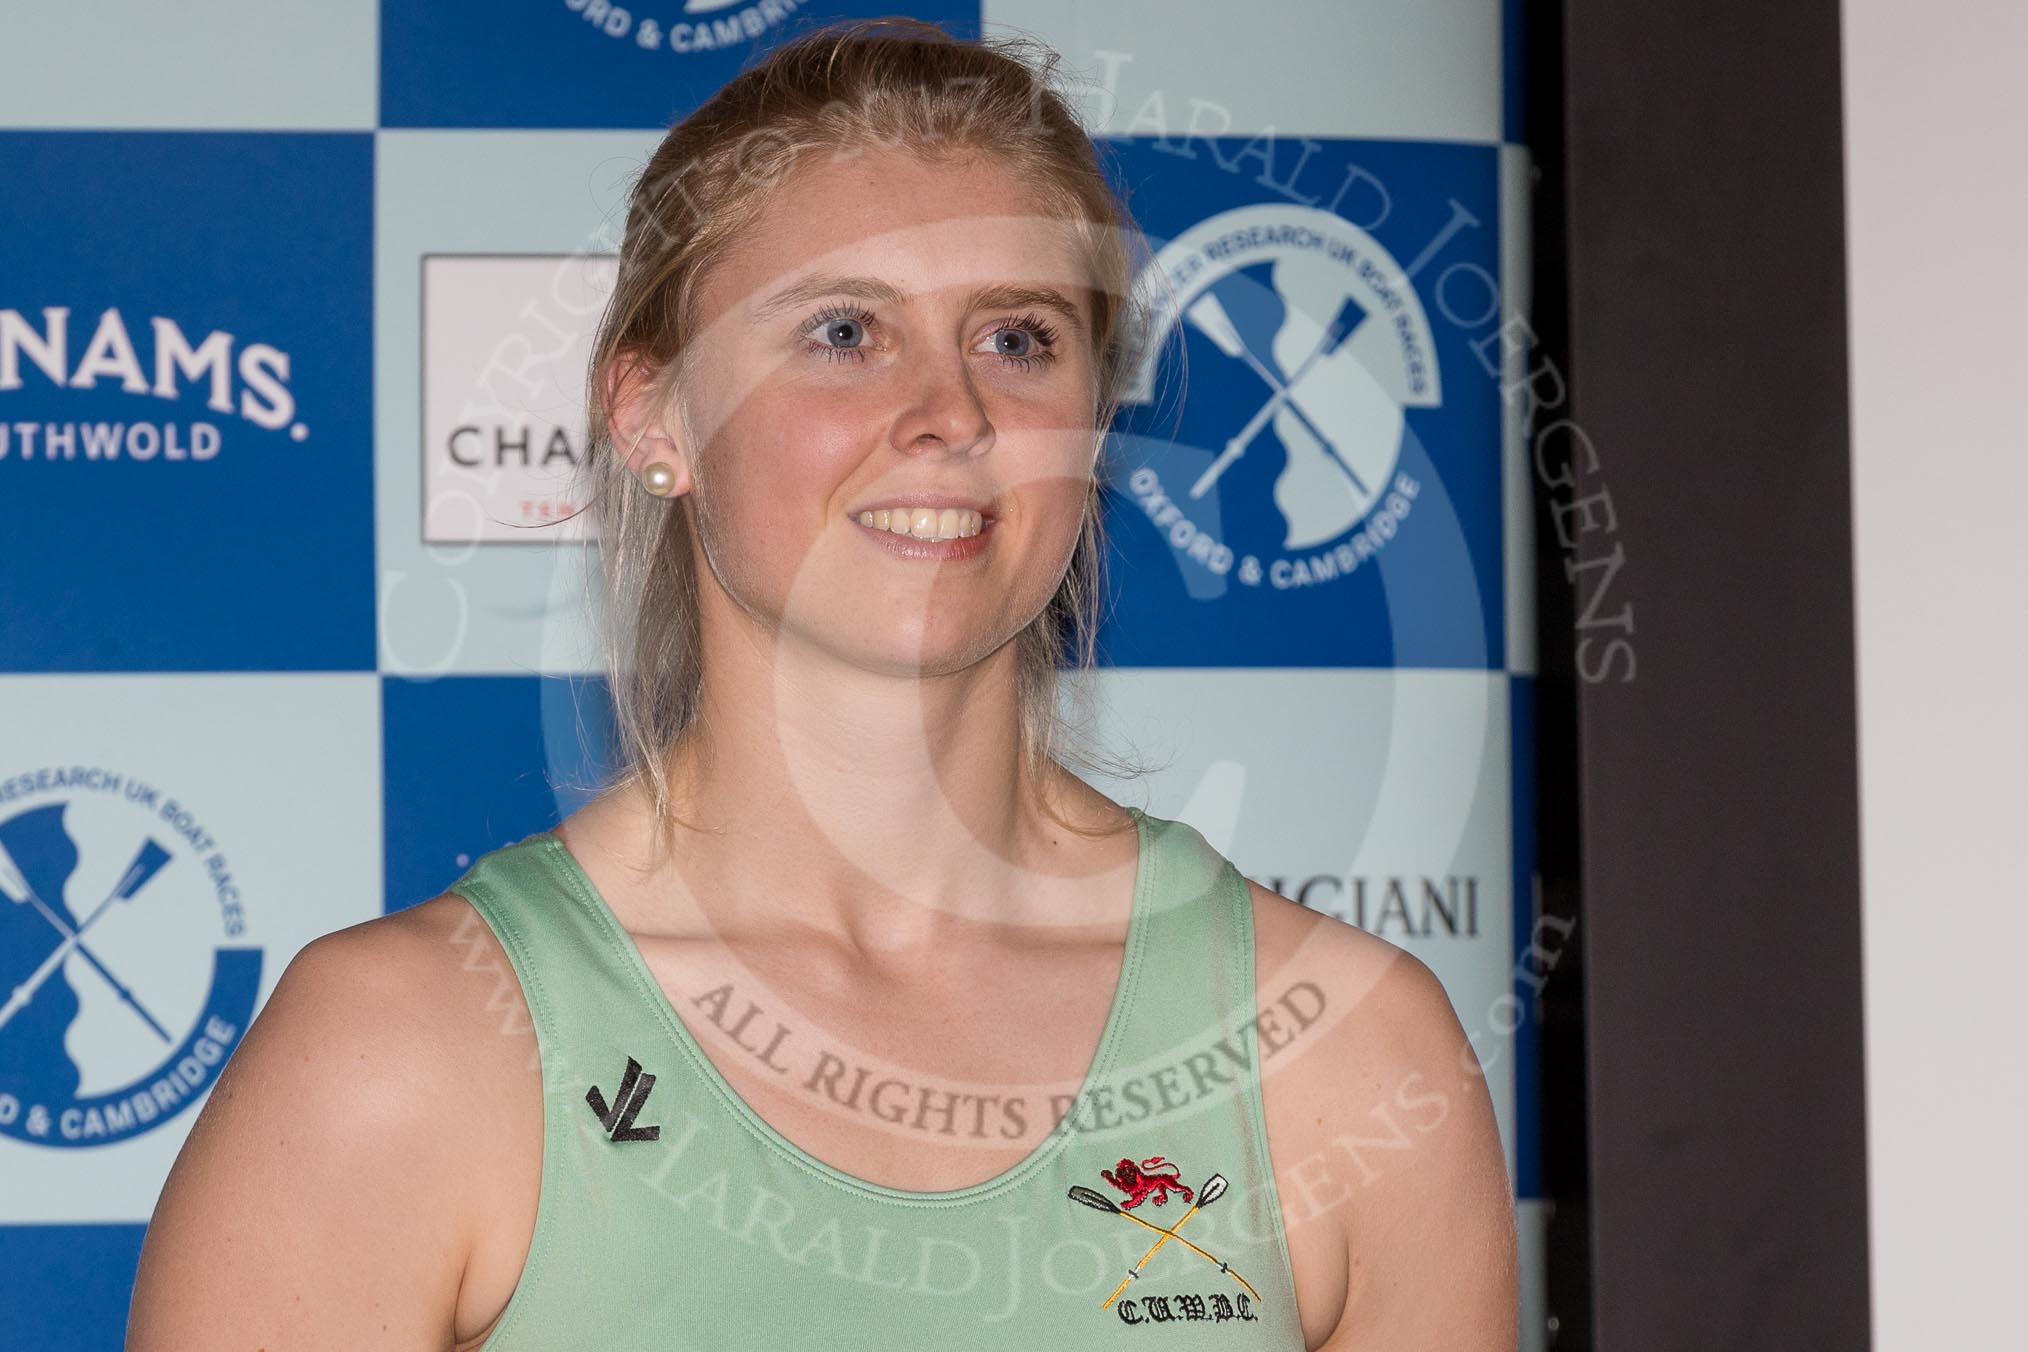 The Boat Race season 2017 - Crew Announcement and Weigh-In: Holly Hill (Downing) studies Human, Social and Political Sciences.
The Francis Crick Institute,
London NW1,

United Kingdom,
on 14 March 2017 at 11:27, image #40